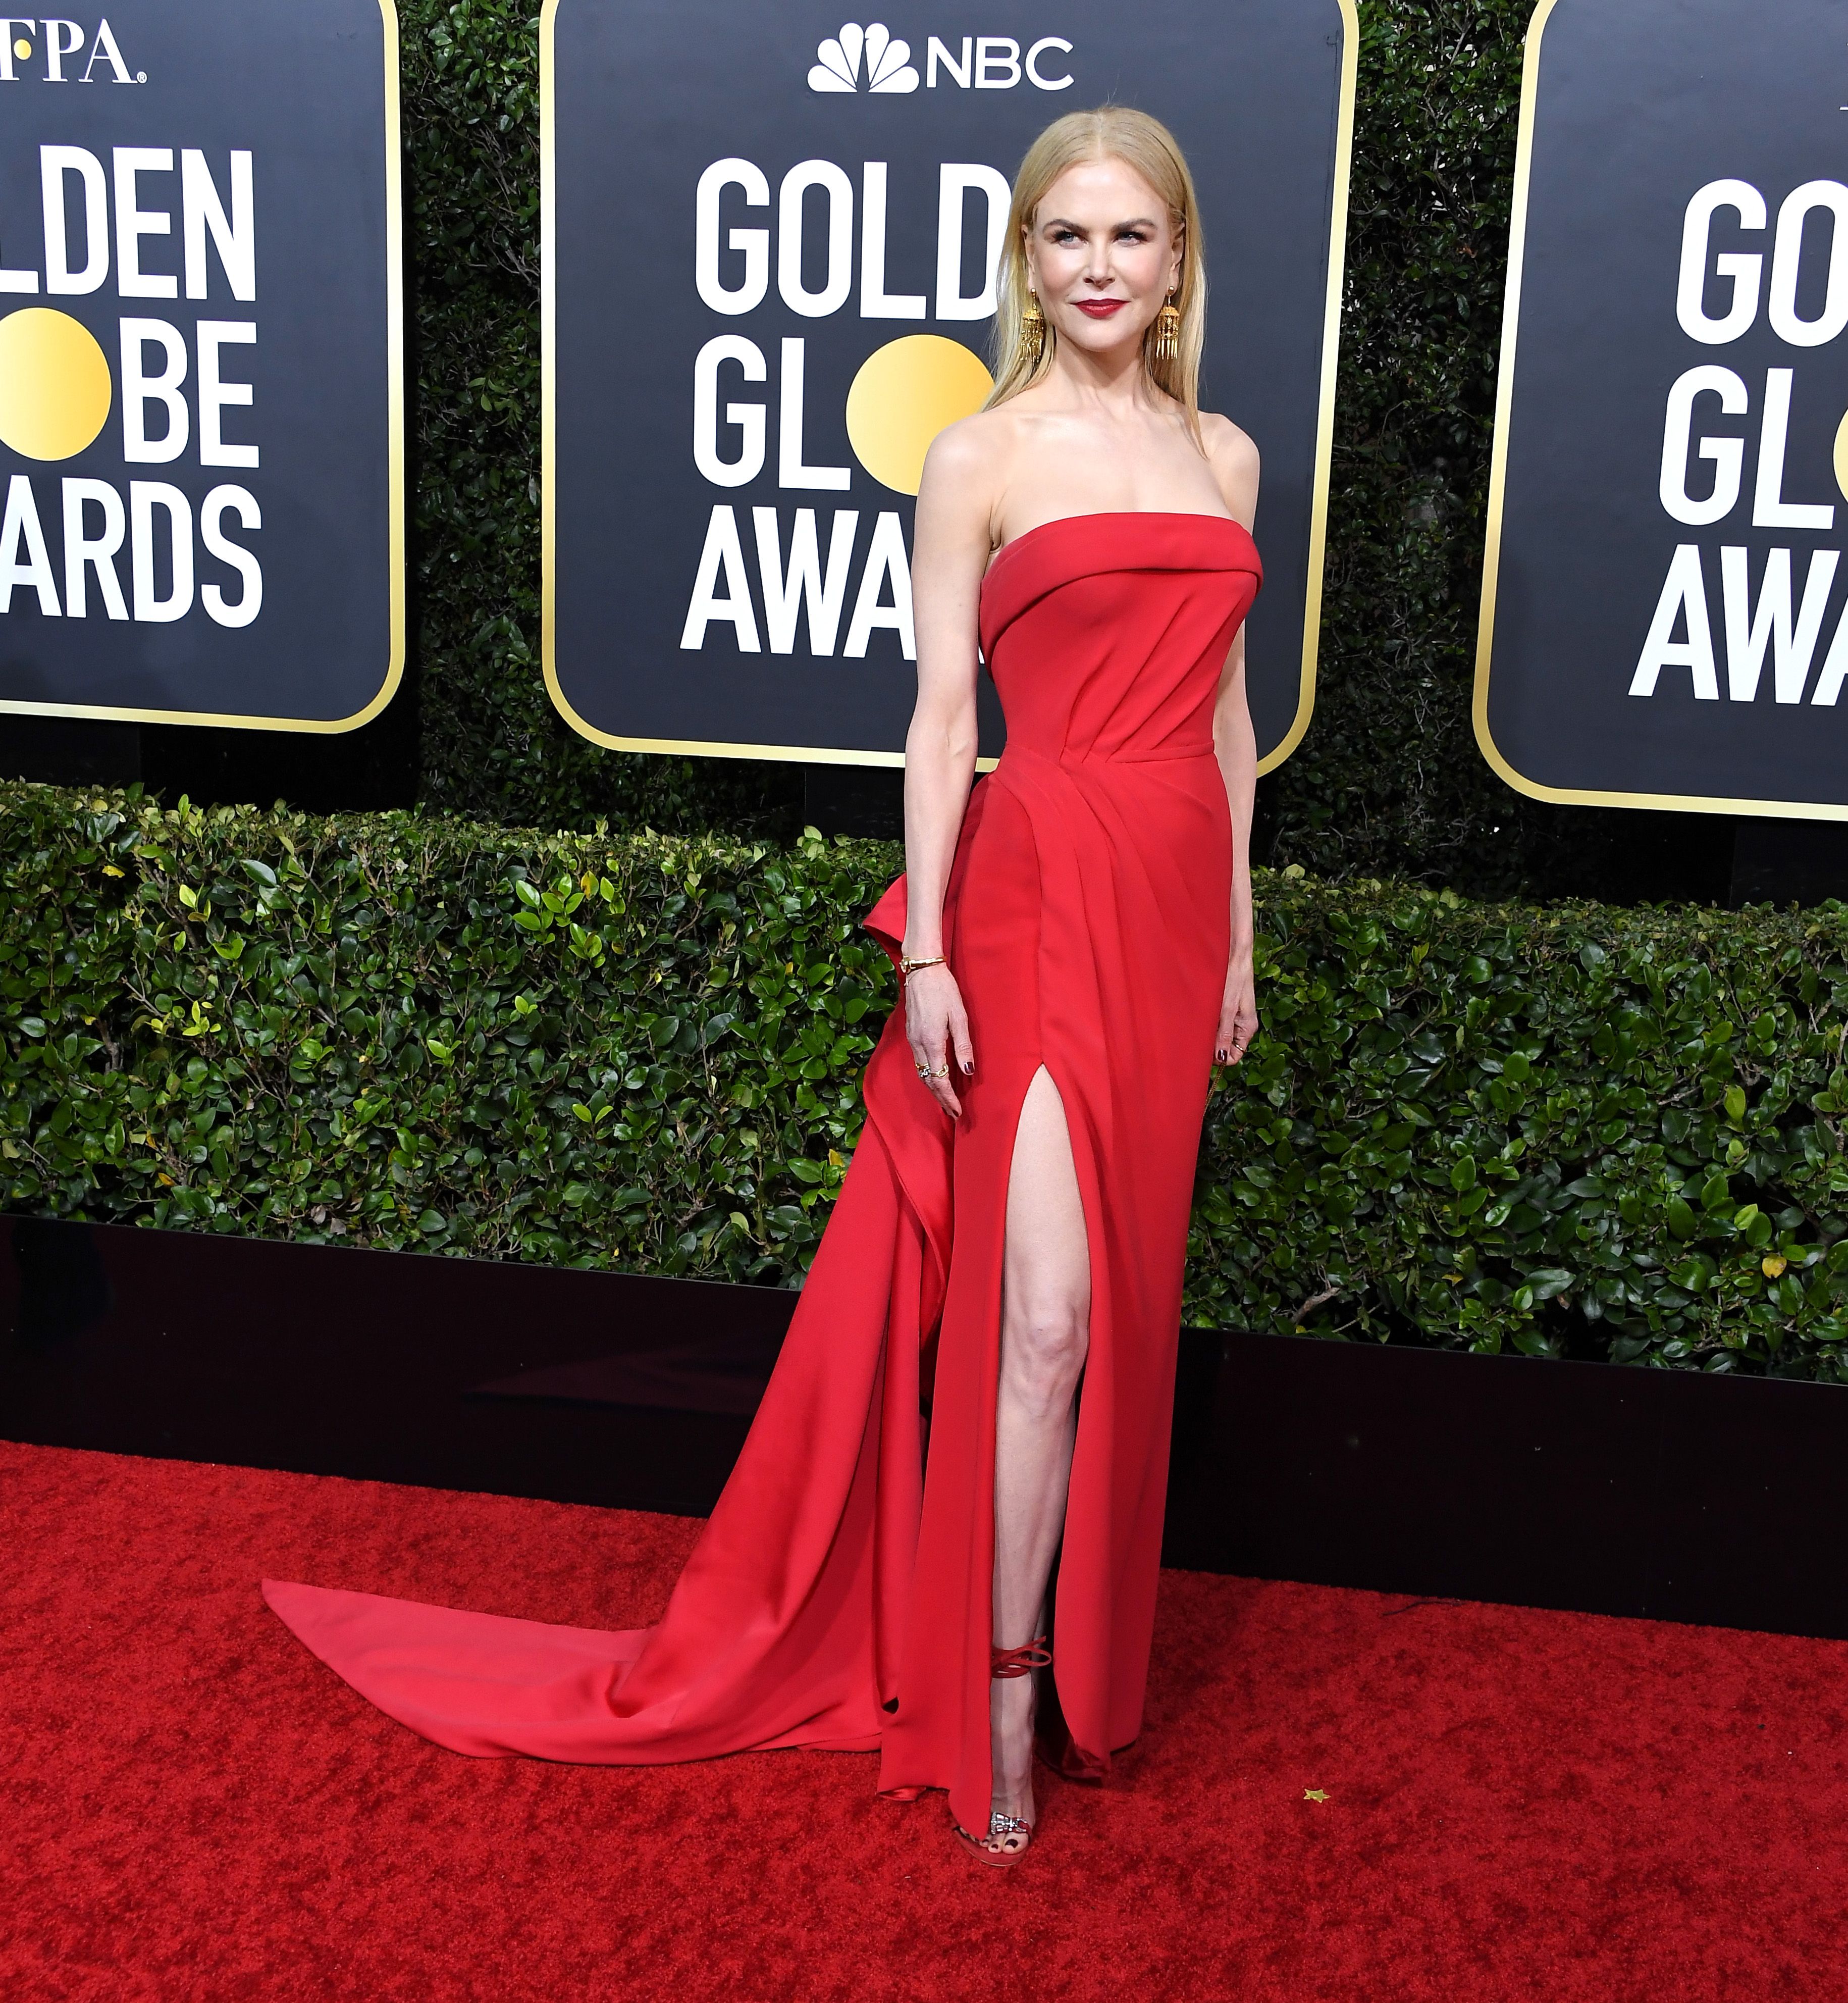 Nicole Kidman's Louis Vuitton Gown at the Globes – The Hollywood